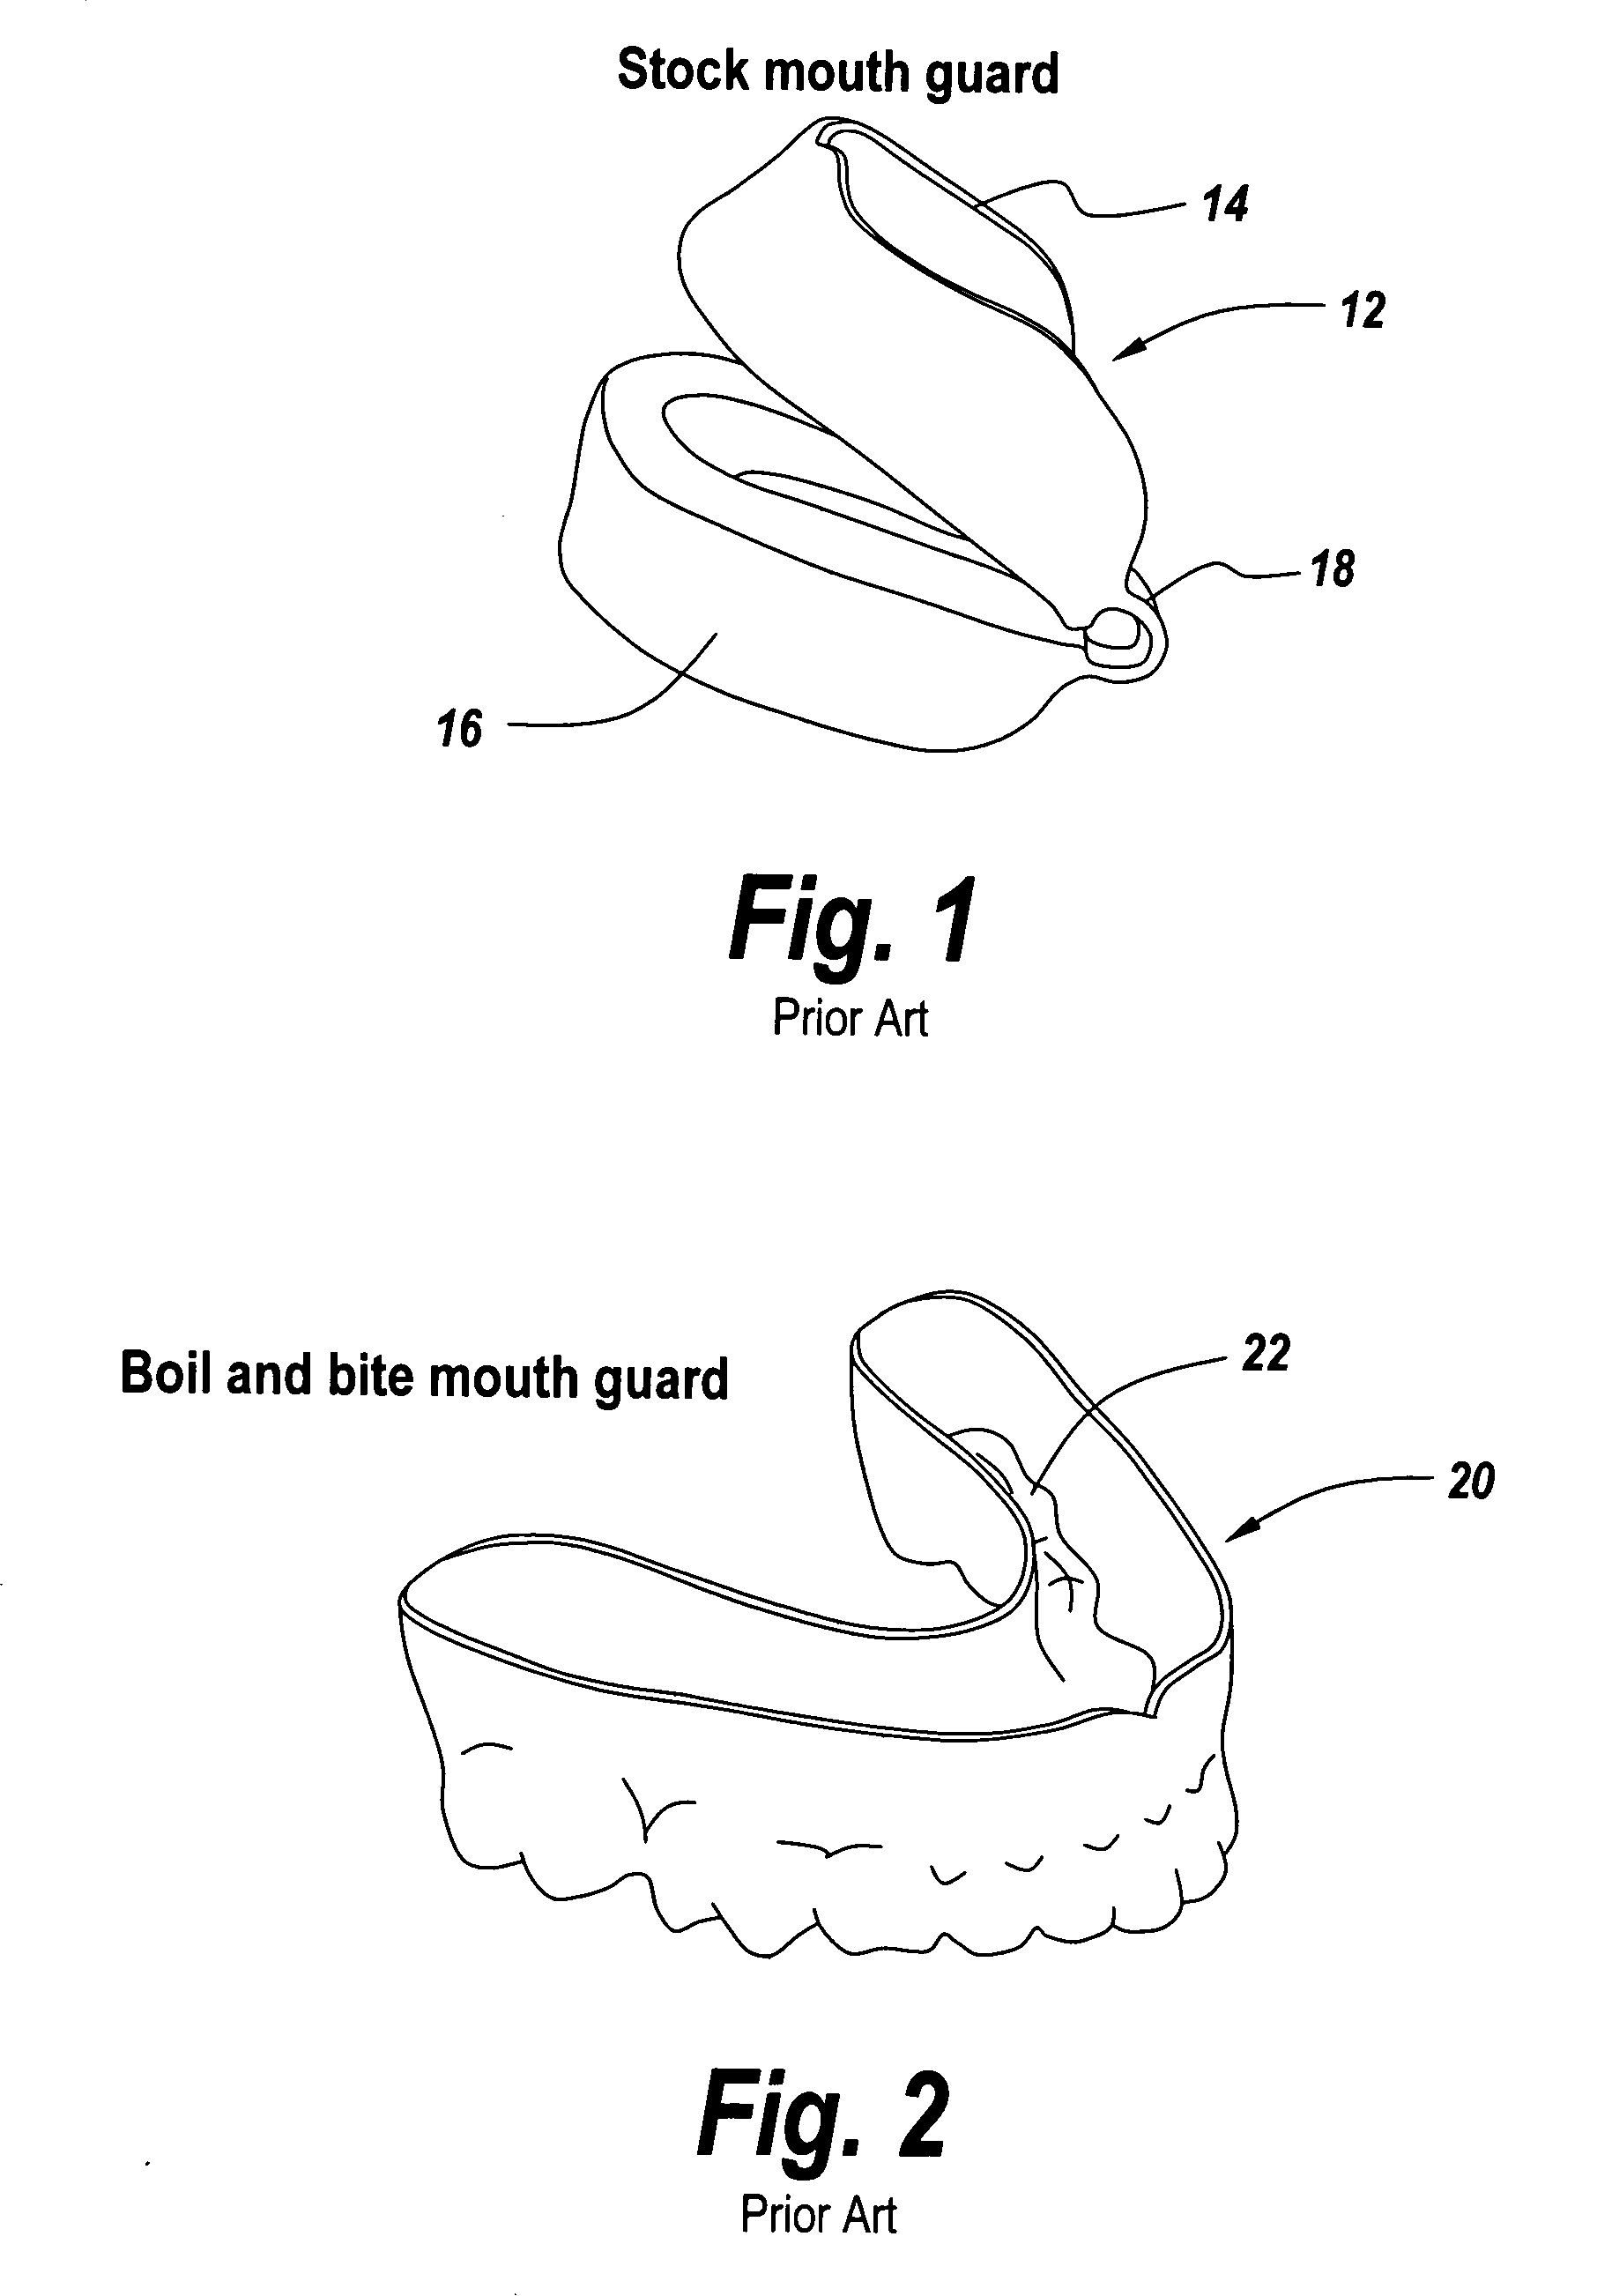 Method and apparatus for protecting teeth, preventing the effects of bruxism and protecting oral structures from sports injuries